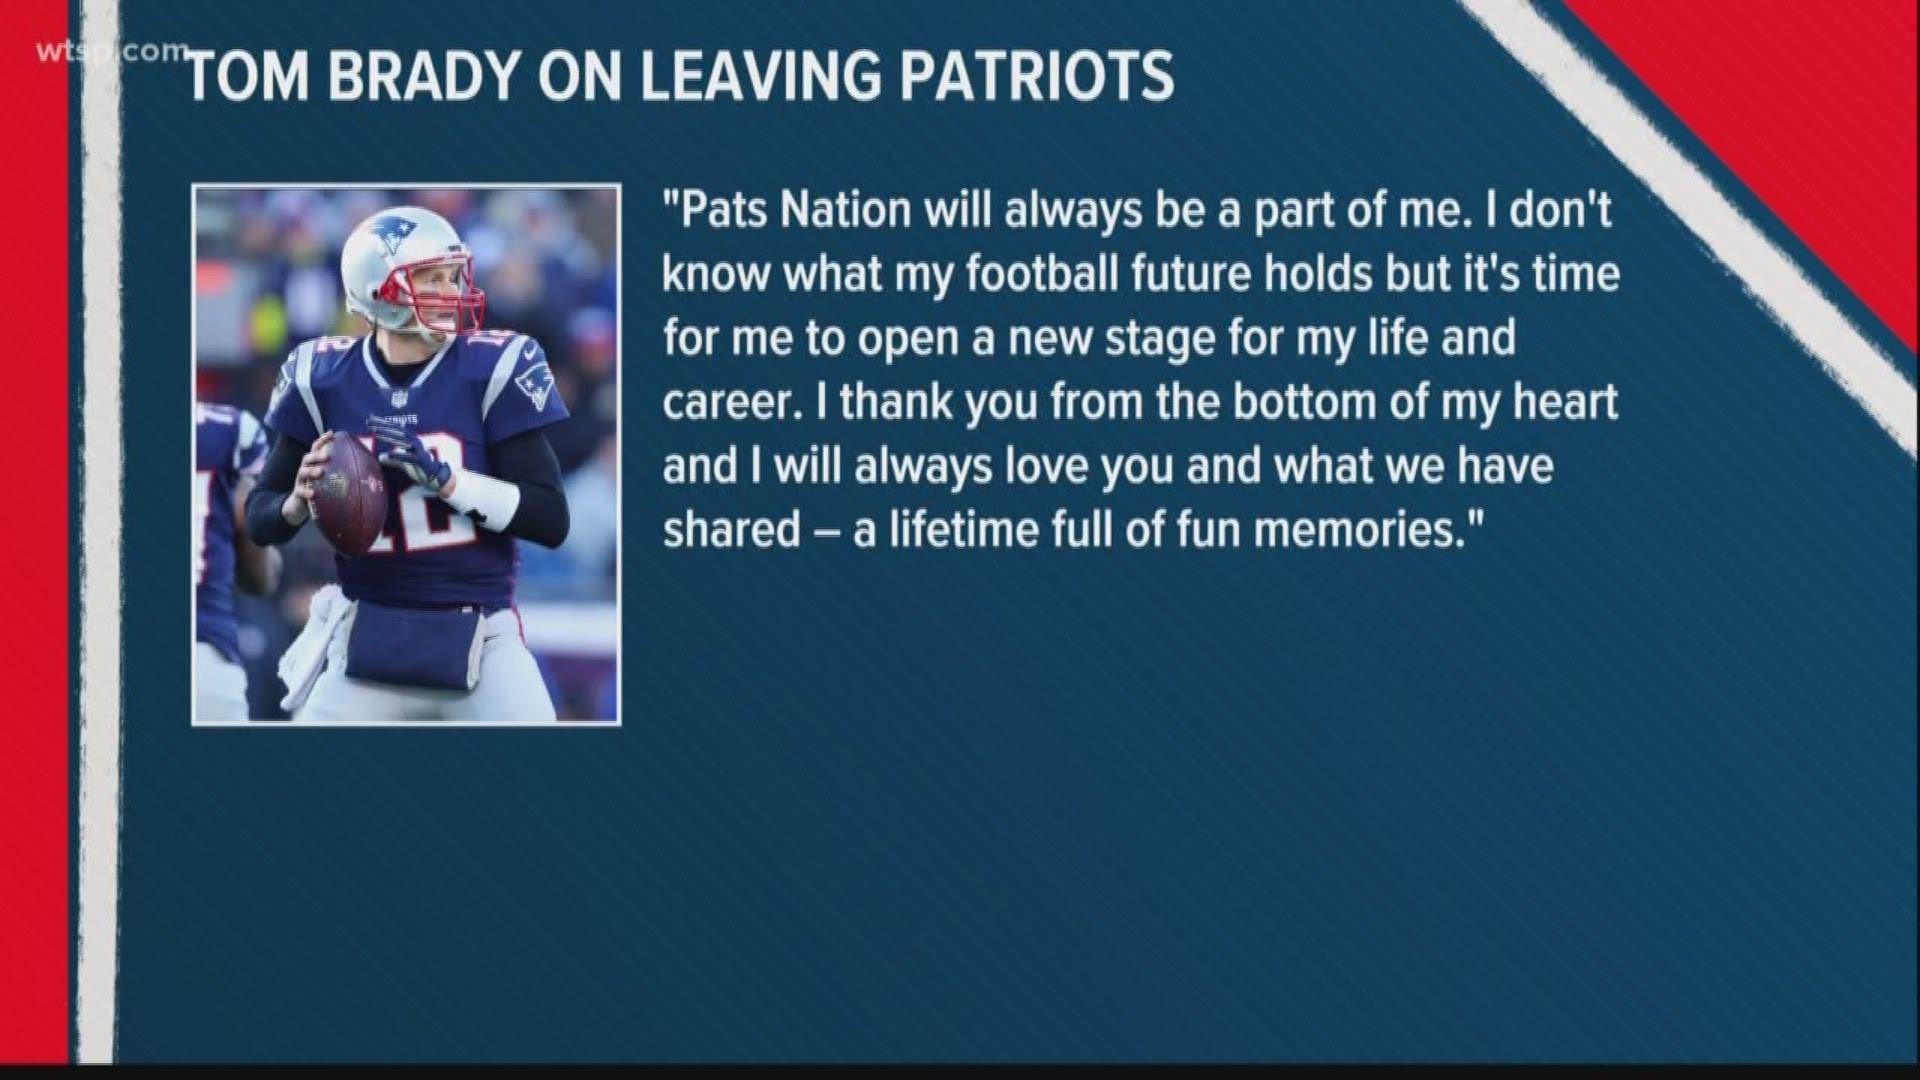 Tom Brady announced on Twitter this morning that he is leaving the New England Patriots.